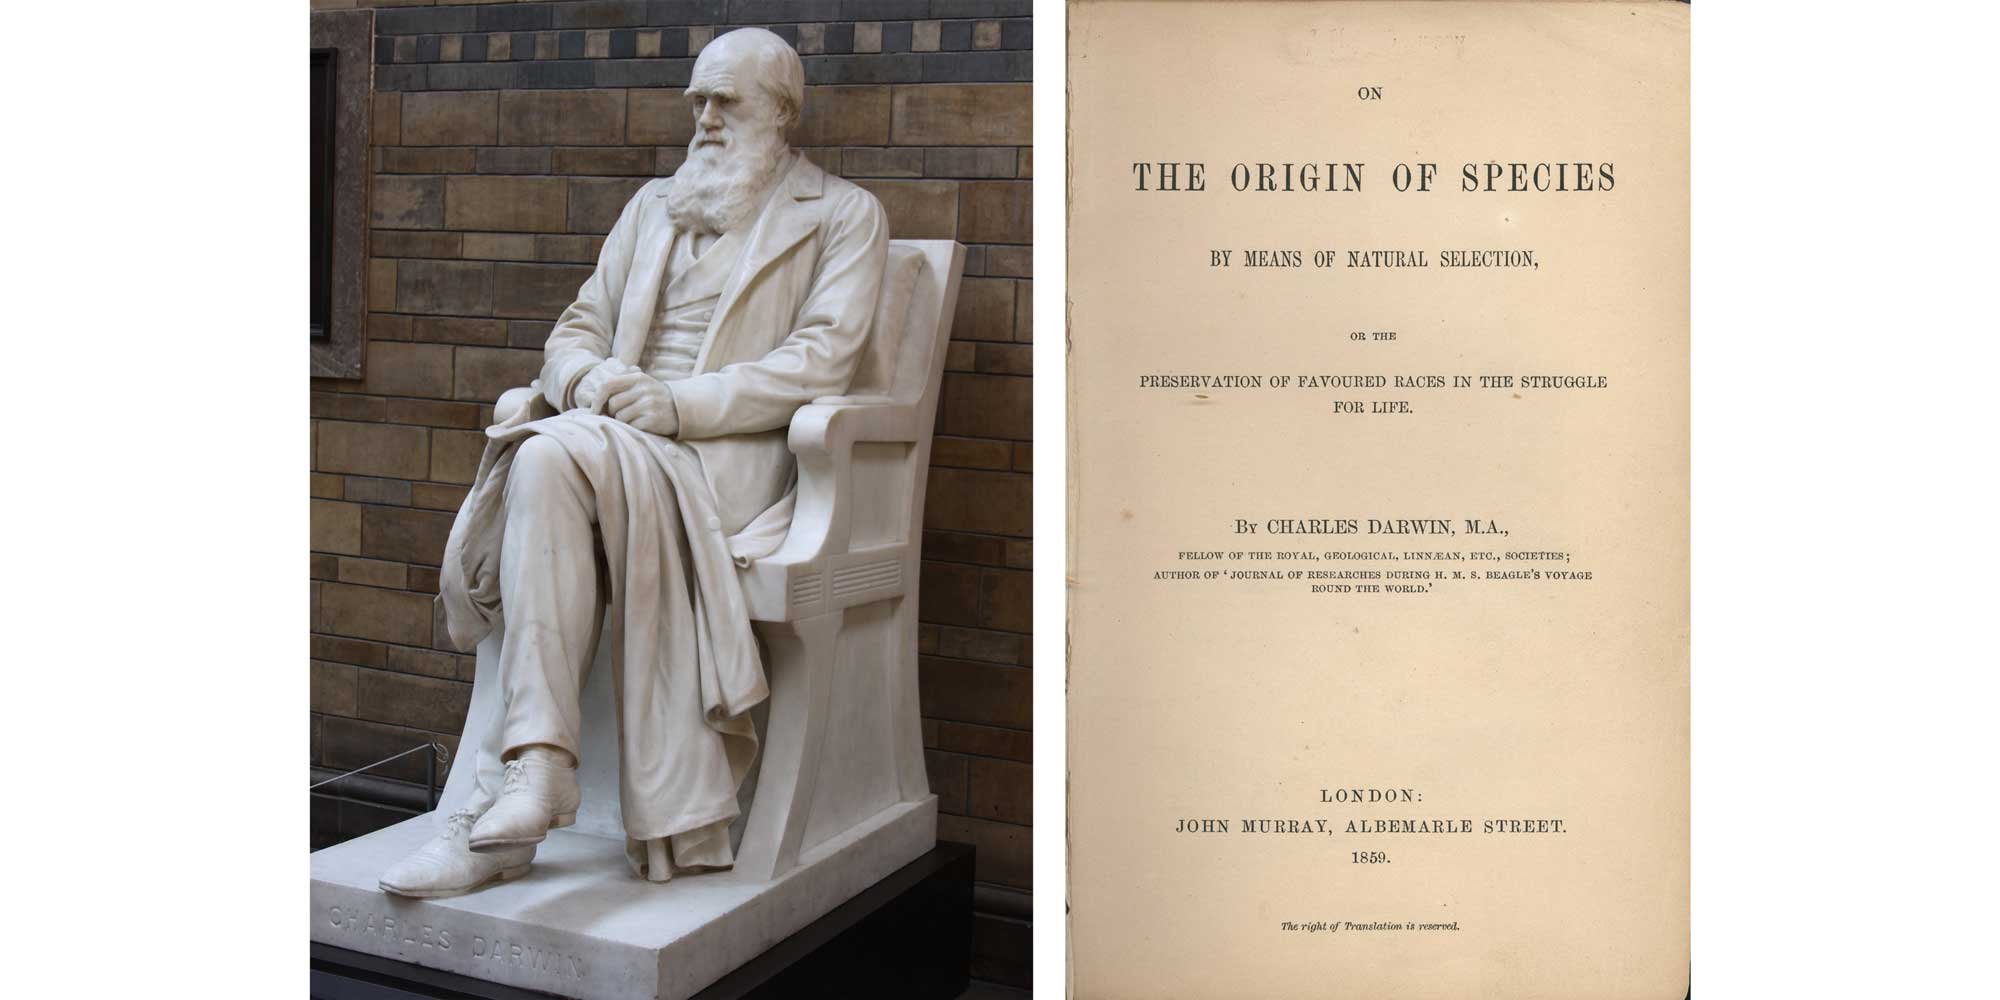 Image showing a statue of Darwin and the title page of the Origin of Species.